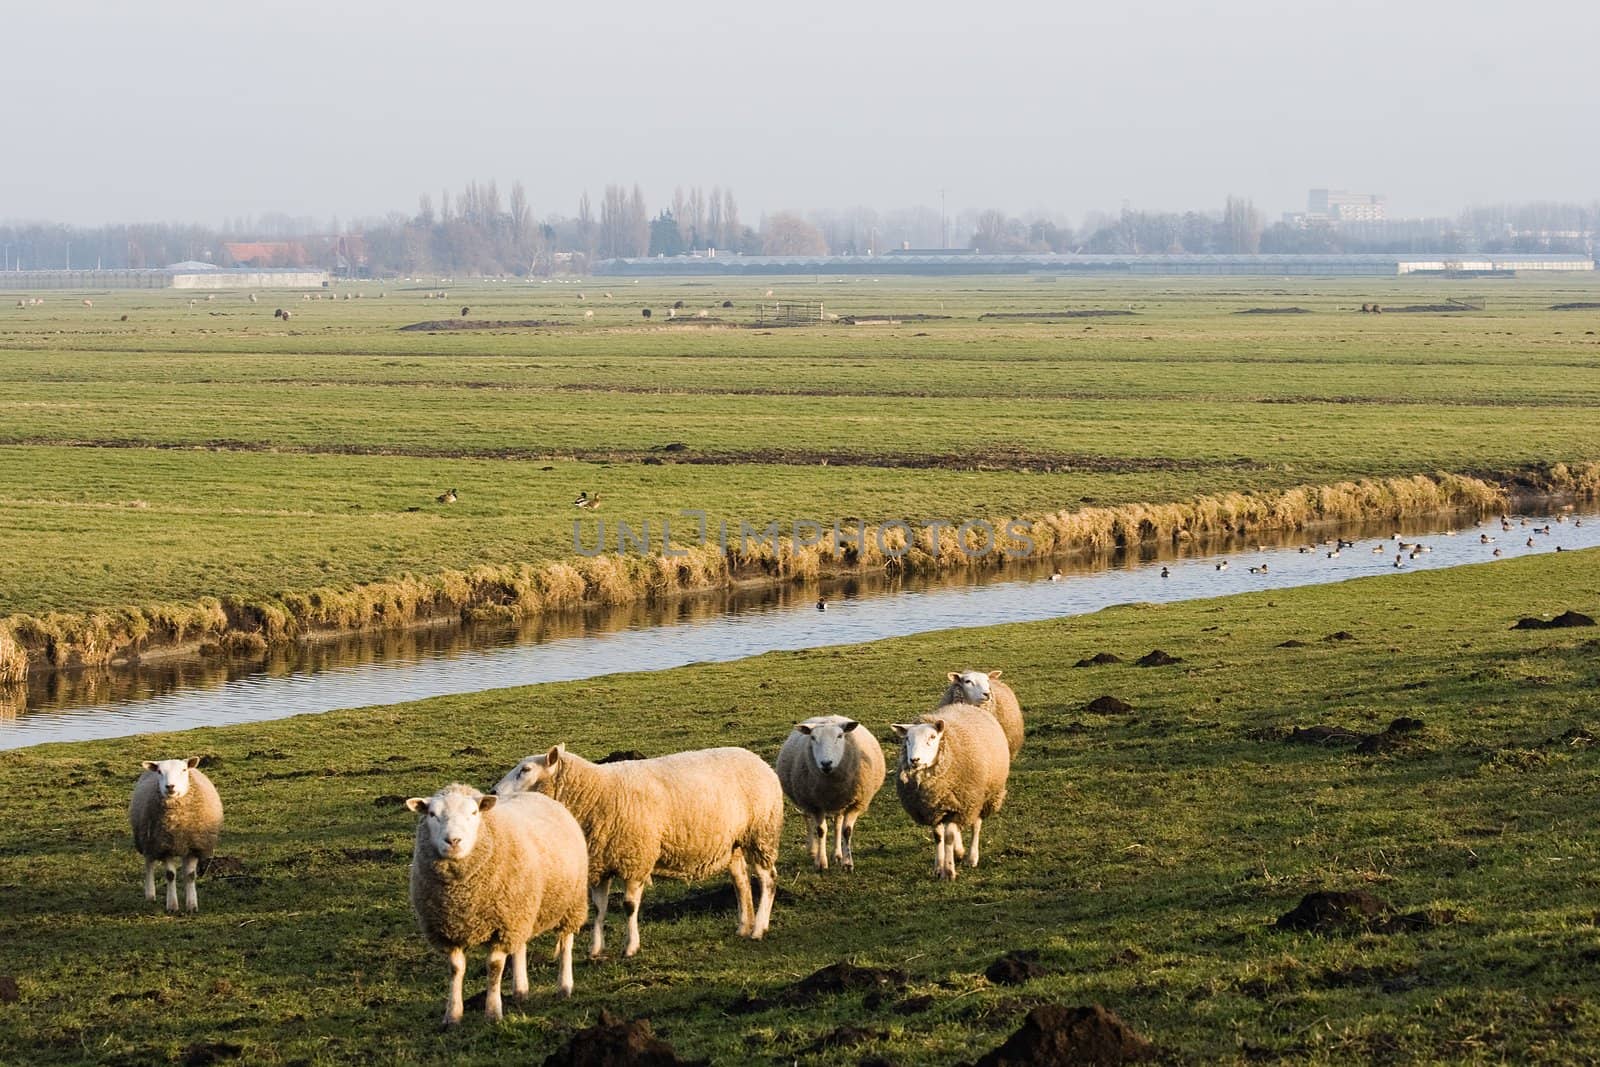 Dutch polder landscape in winter with sheep in foreground and city in background